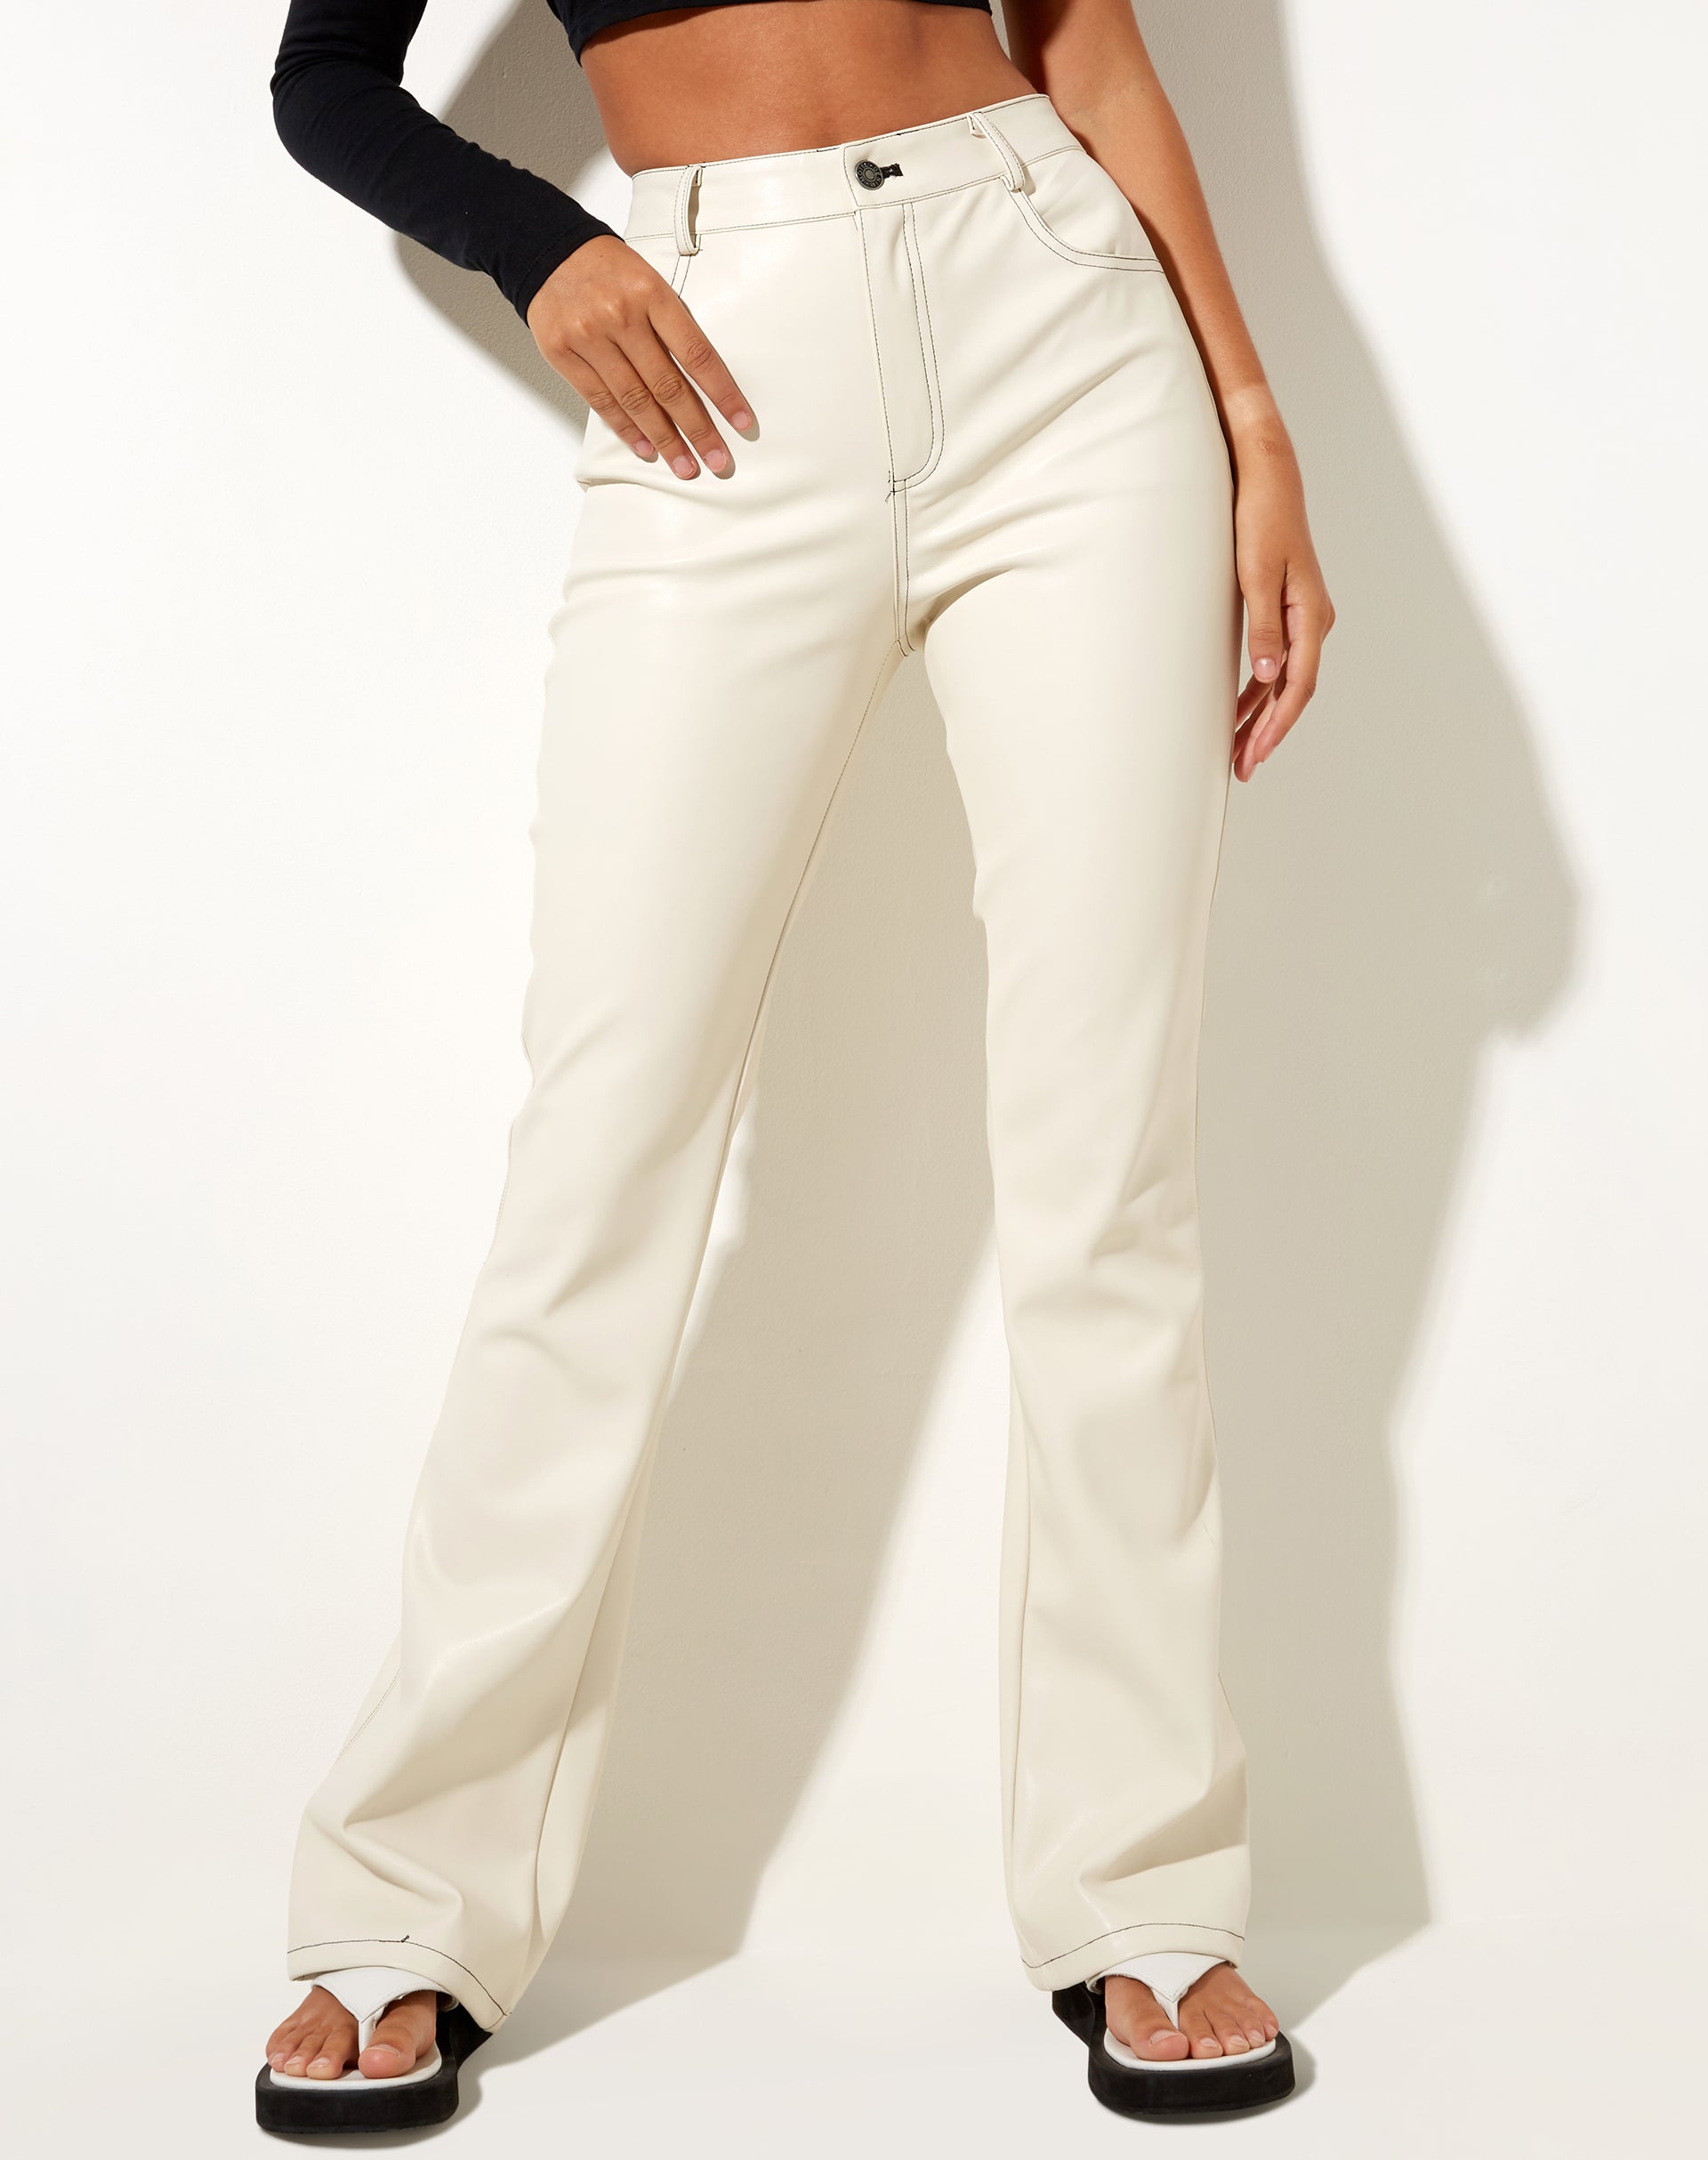 Image of Zorea Trouser in PU Coconut Milk with Black Stitching